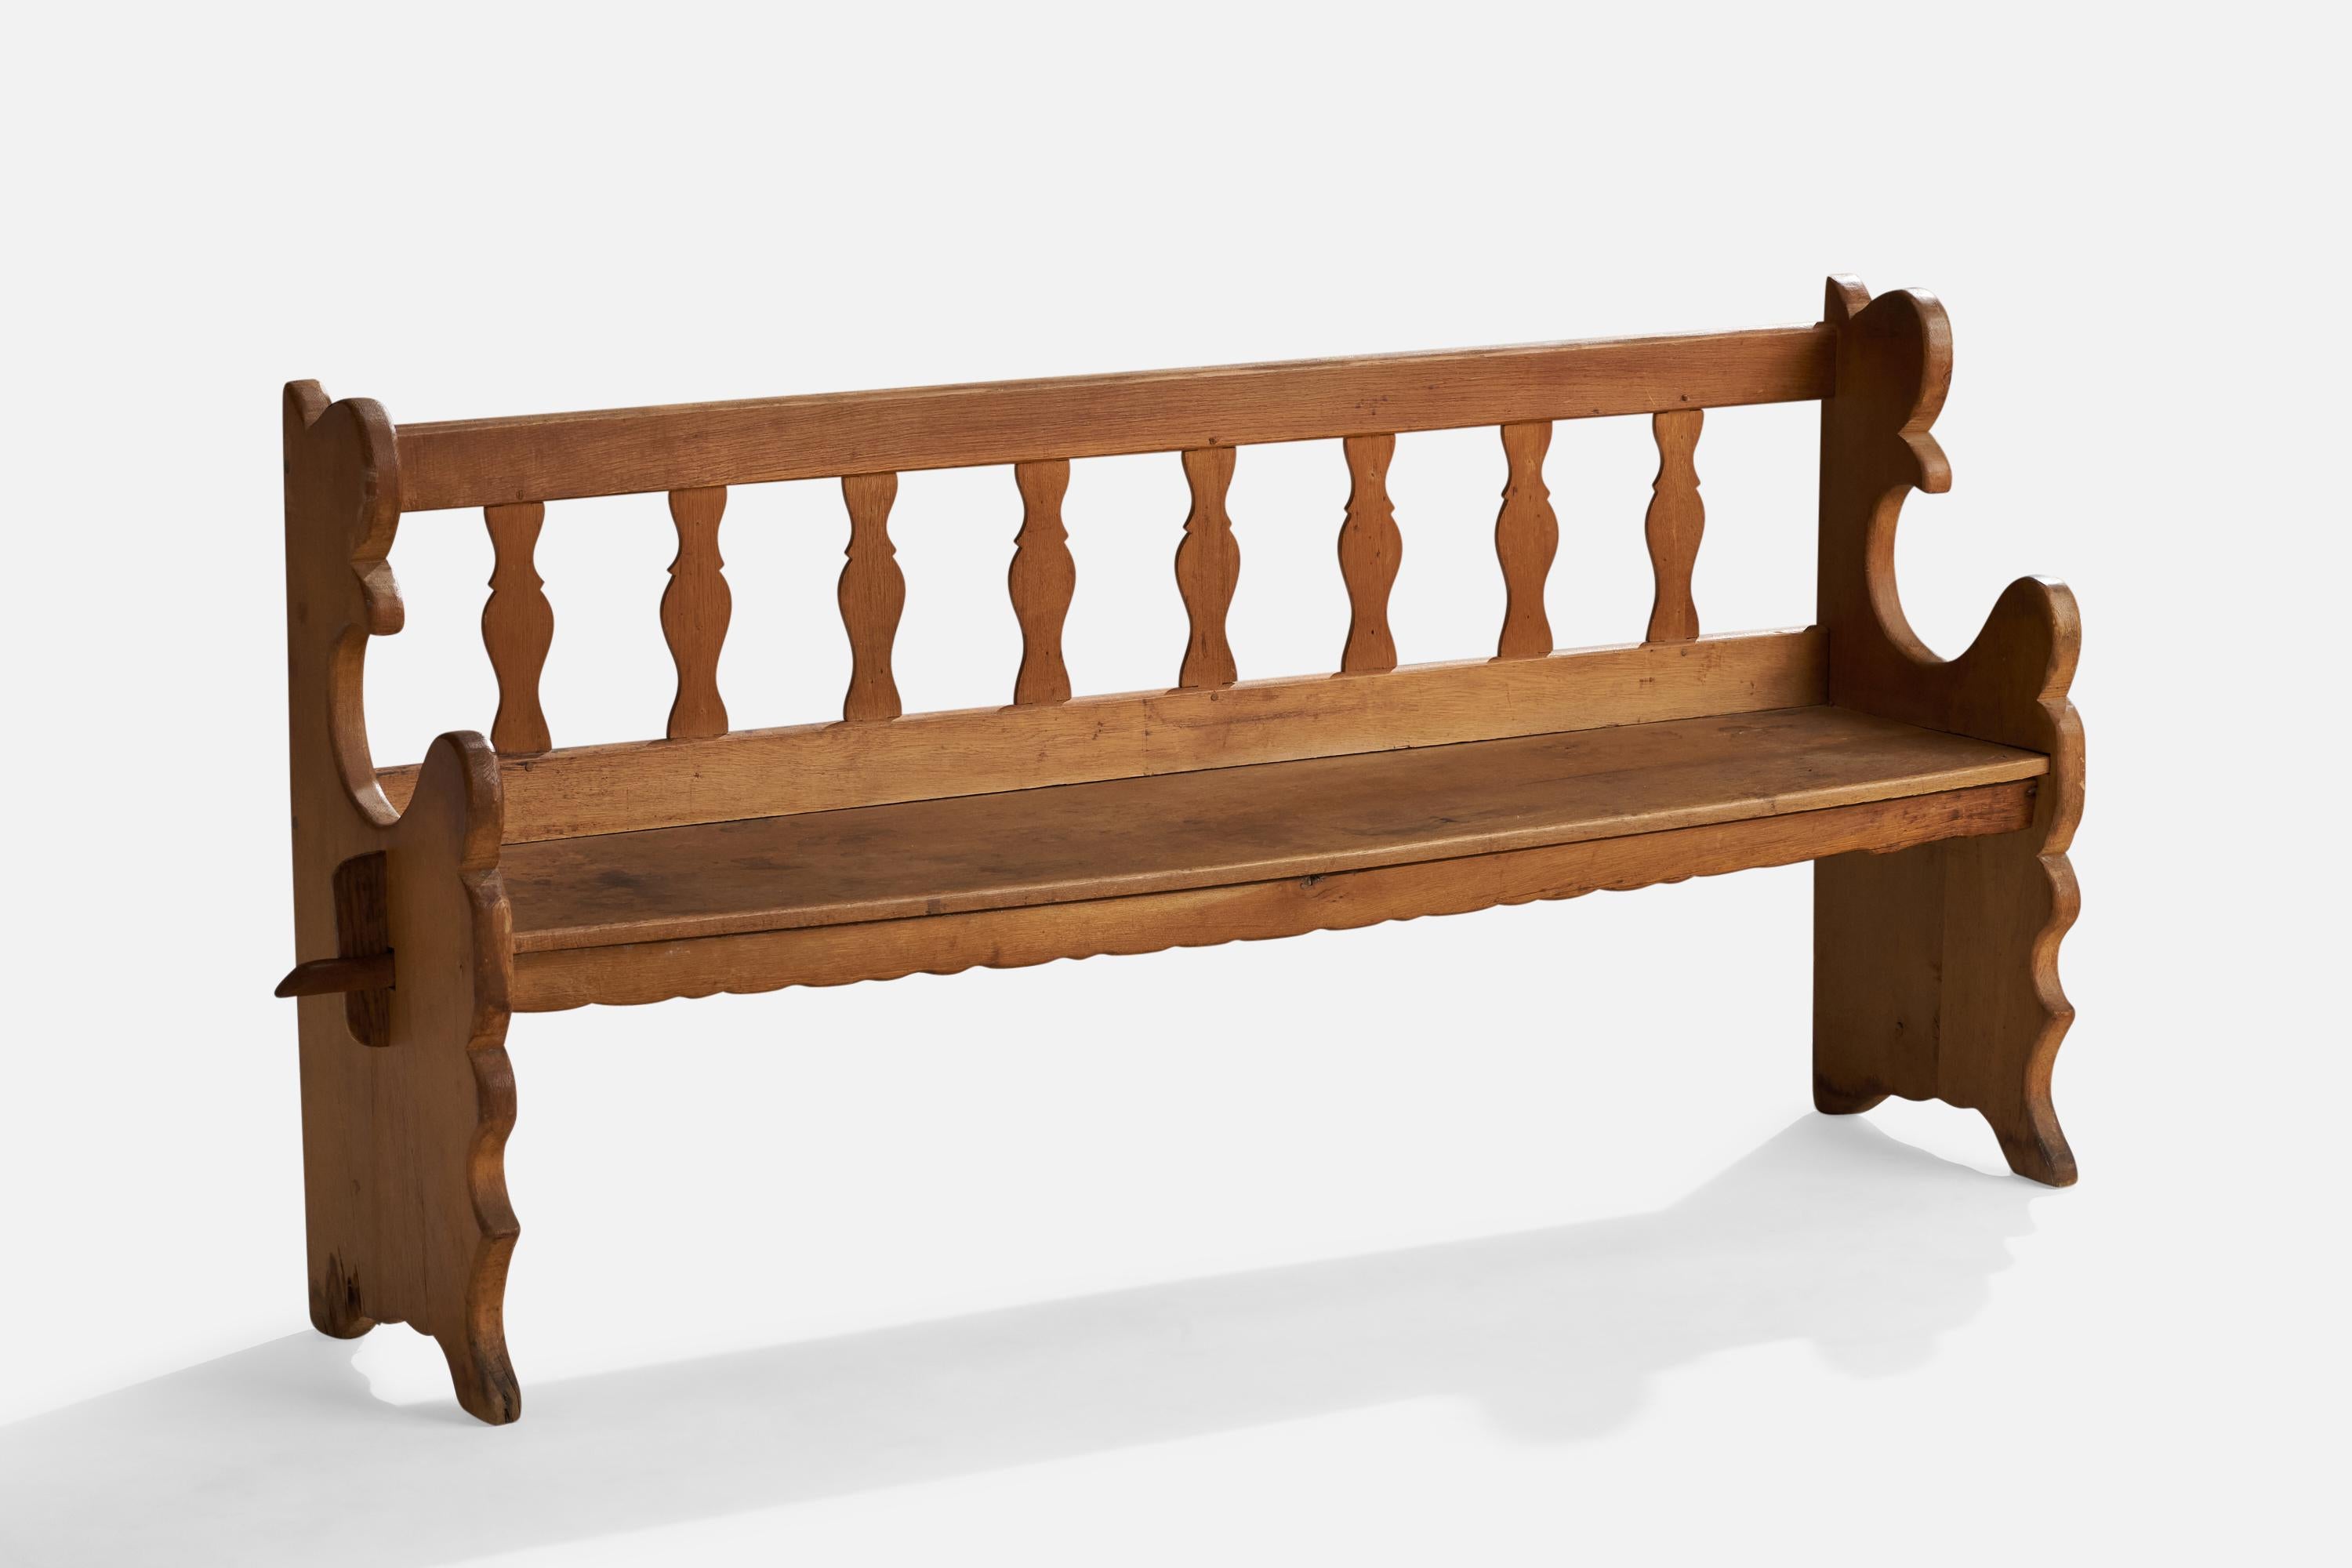 An oak bench designed and produced in Sweden, c. 1920s.

Seat height 18.25